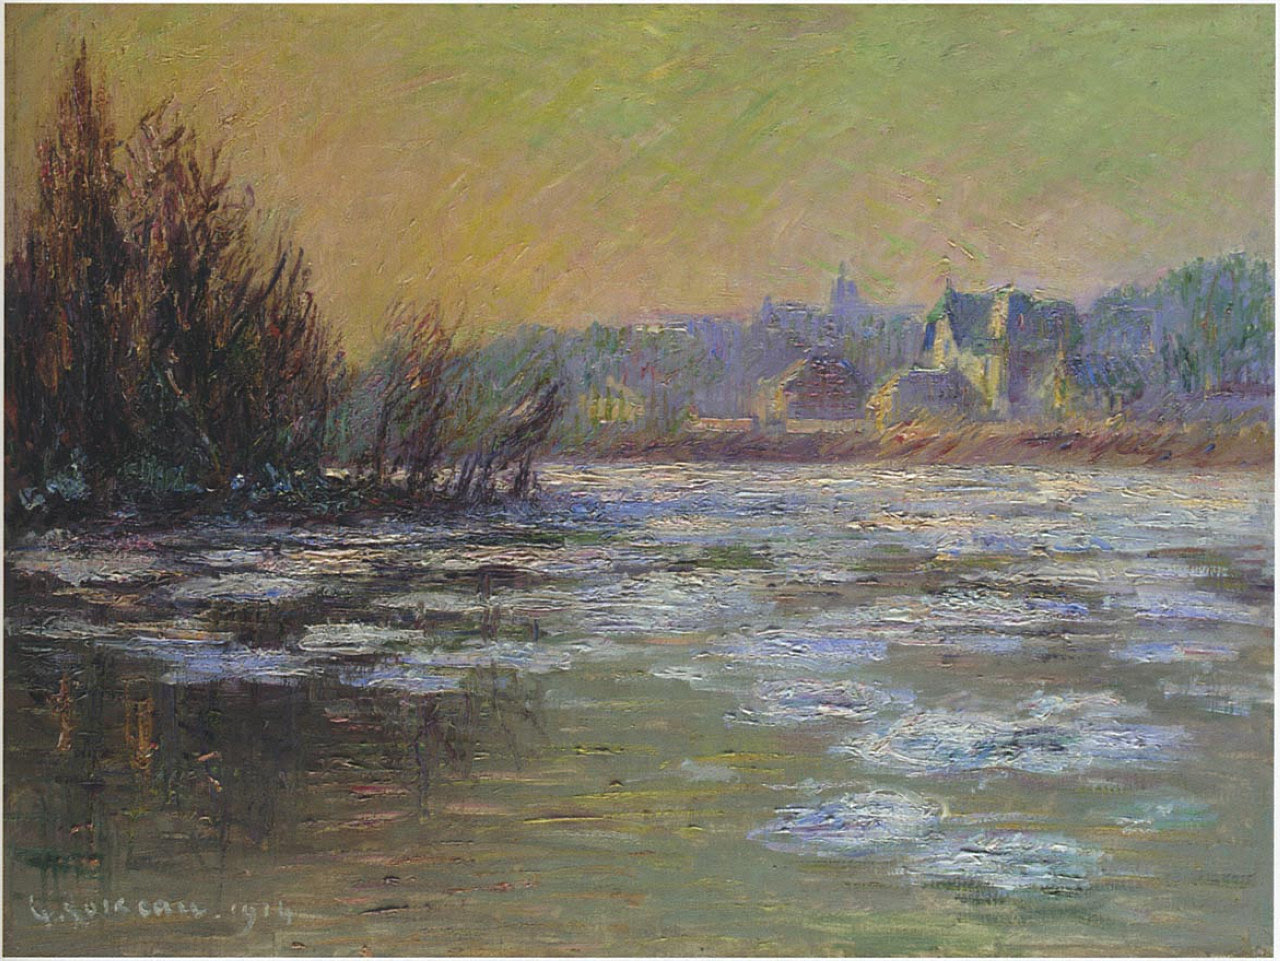 Ice on the Oise River - Gustave Loiseau